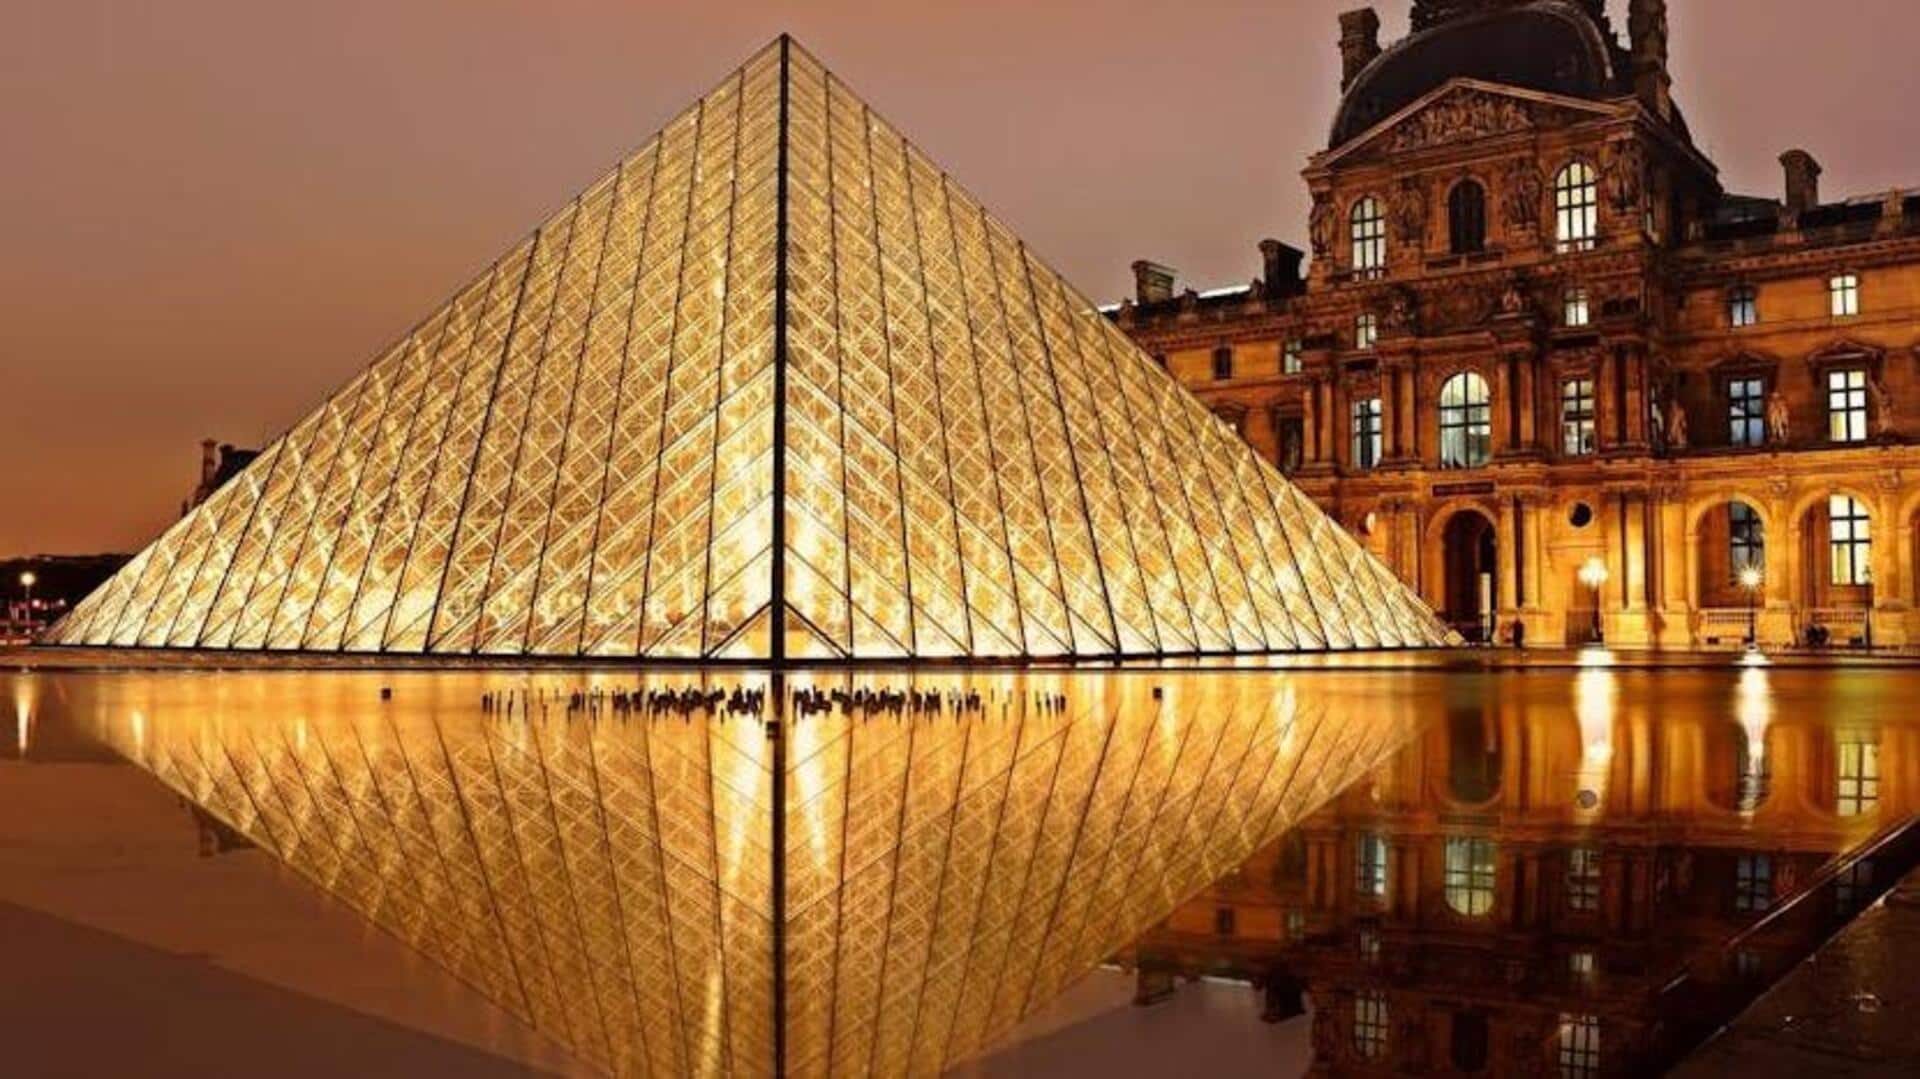 Things to do in Paris for those who appreciate art